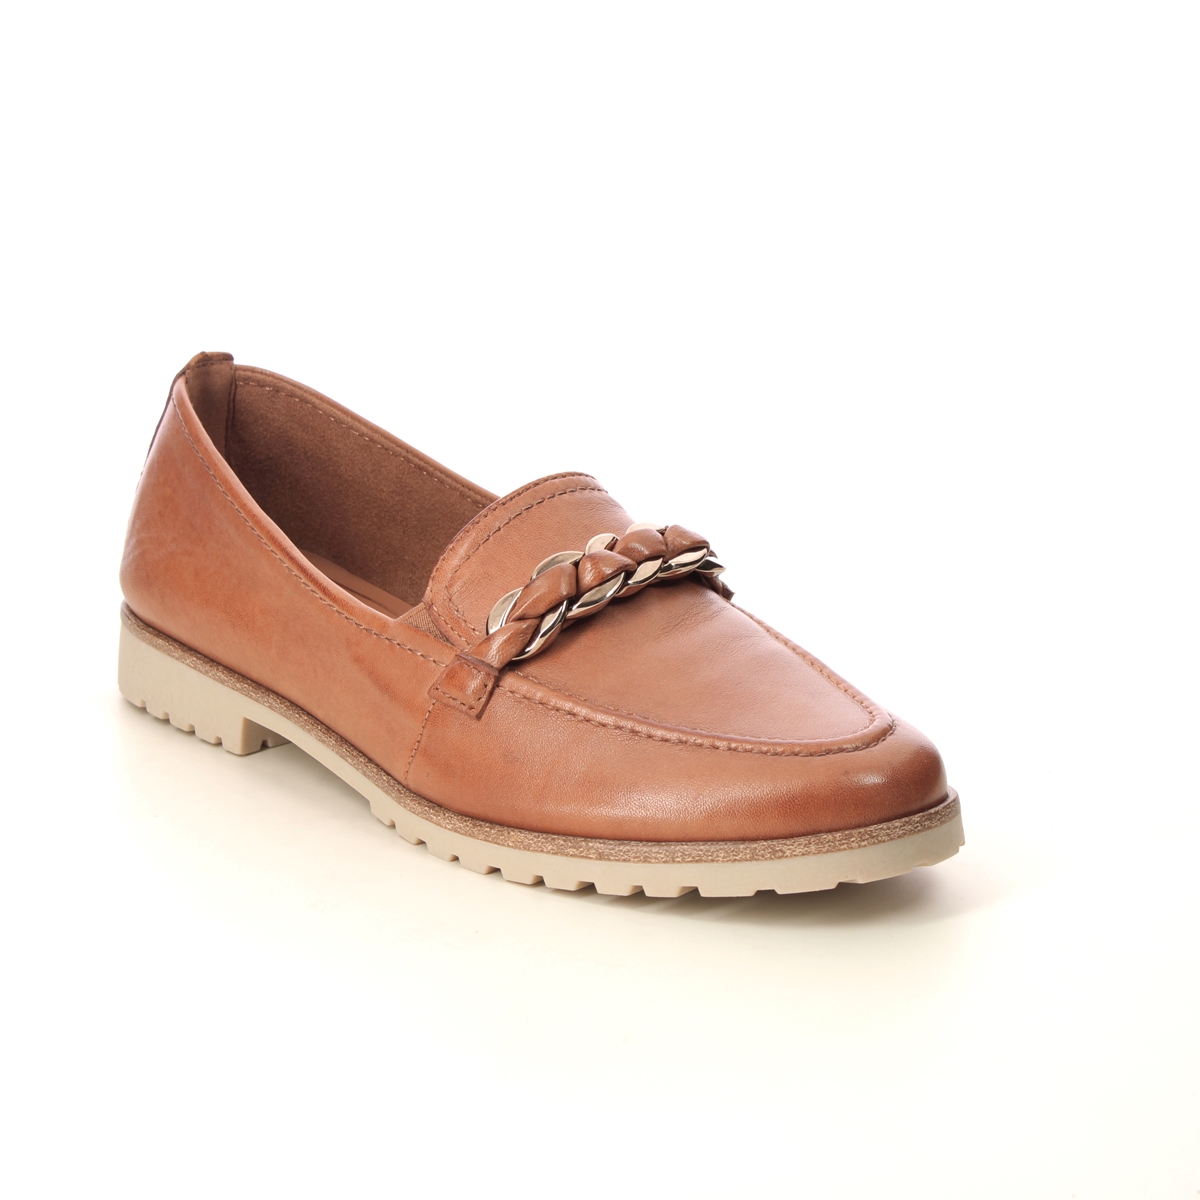 Tamaris Careen Loafer Tan Leather Womens loafers 24200-42-348 in a Plain Leather in Size 41